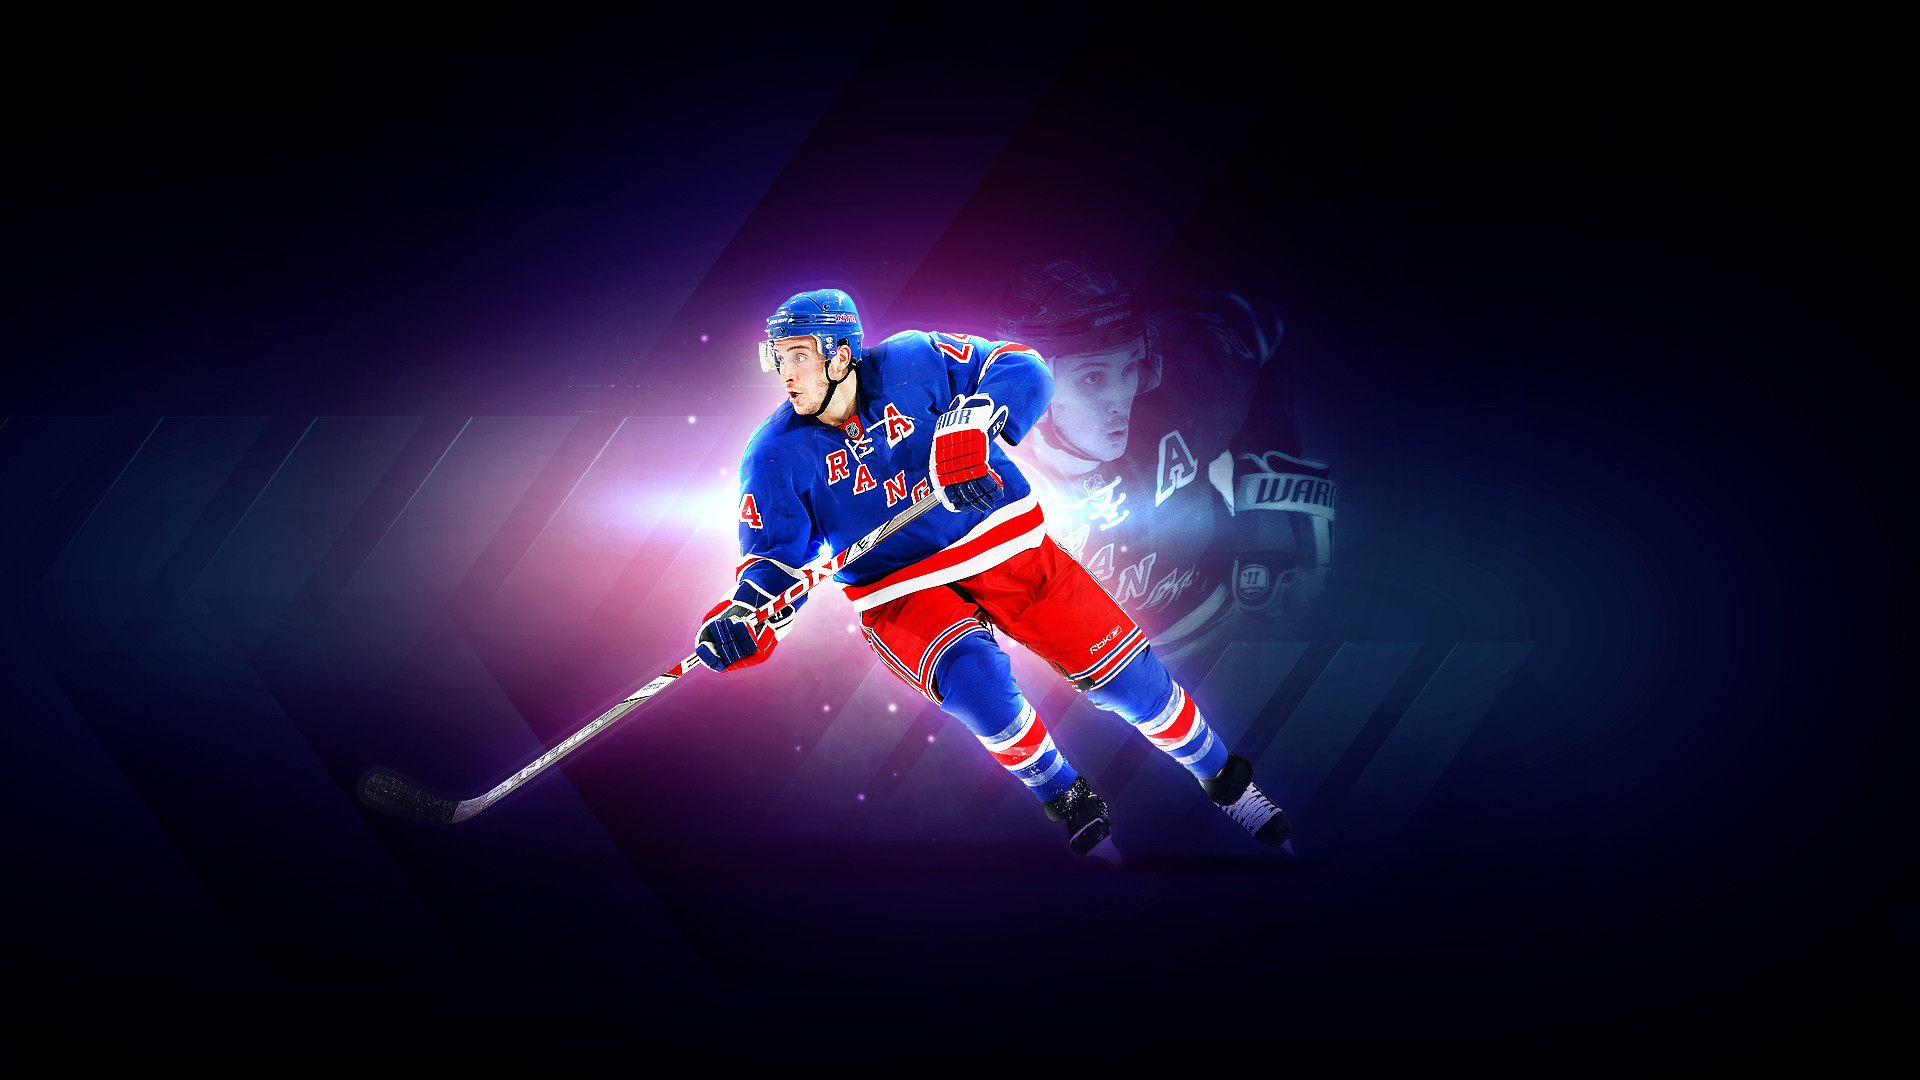 1920x1080 Ryan Callahan on ice wallpapers and images - wallpapers, pictures, photos